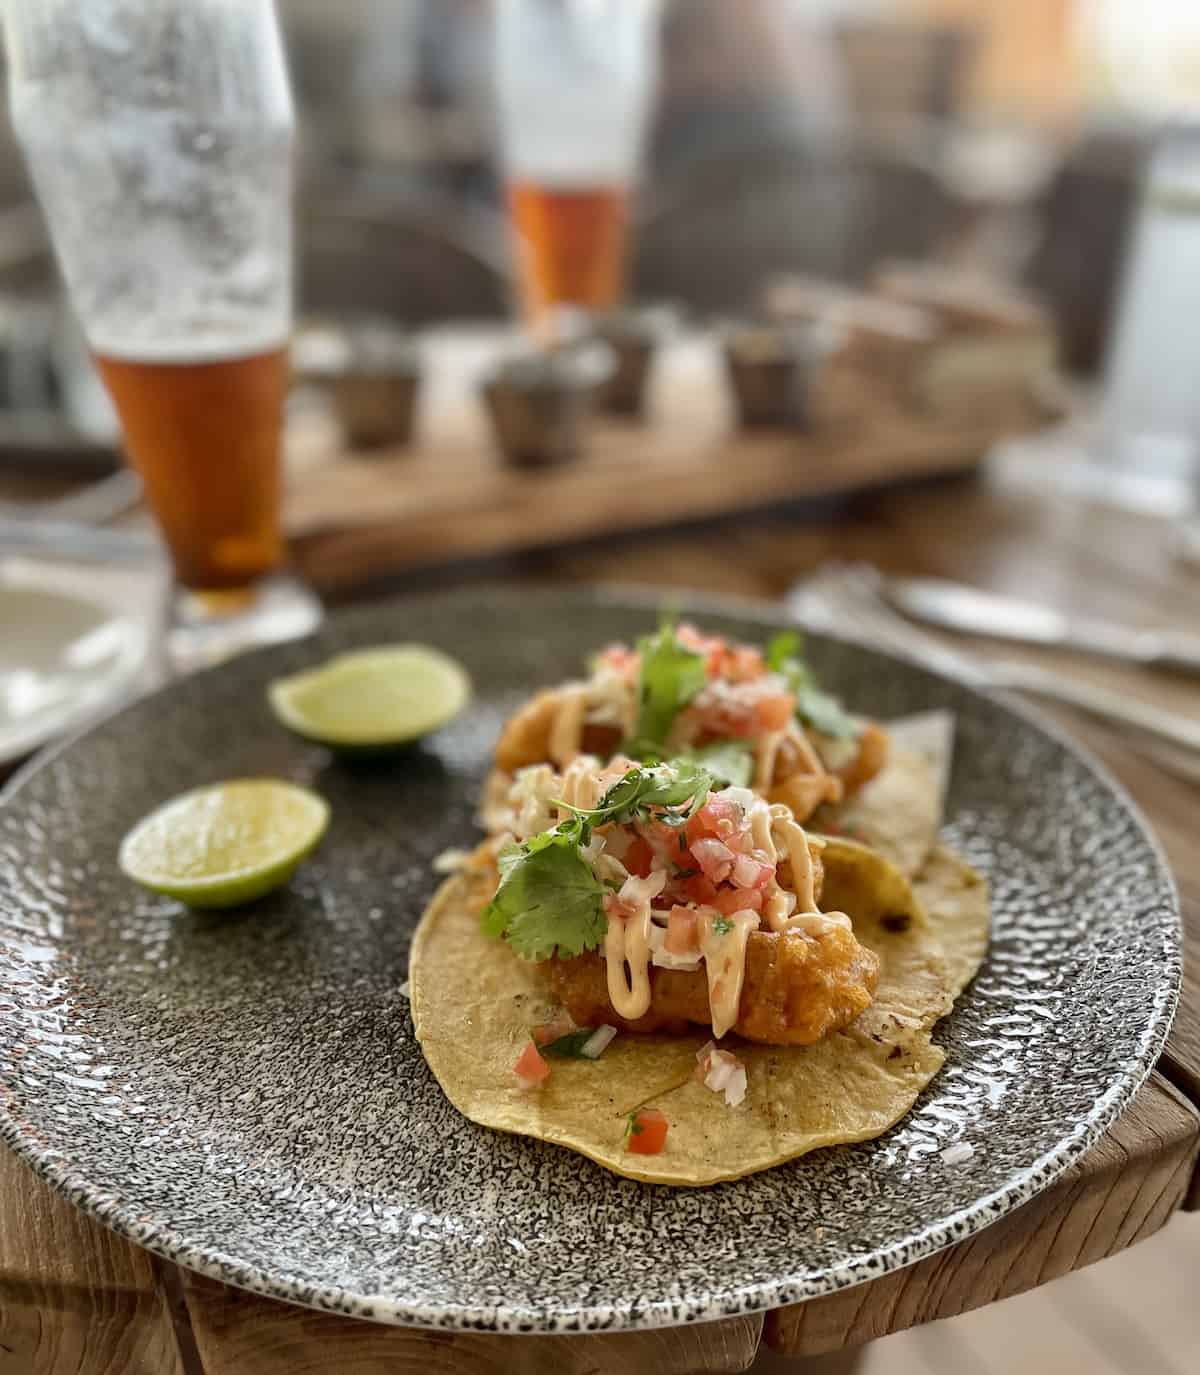 Tacos on a plate on a wood table with beer in background.